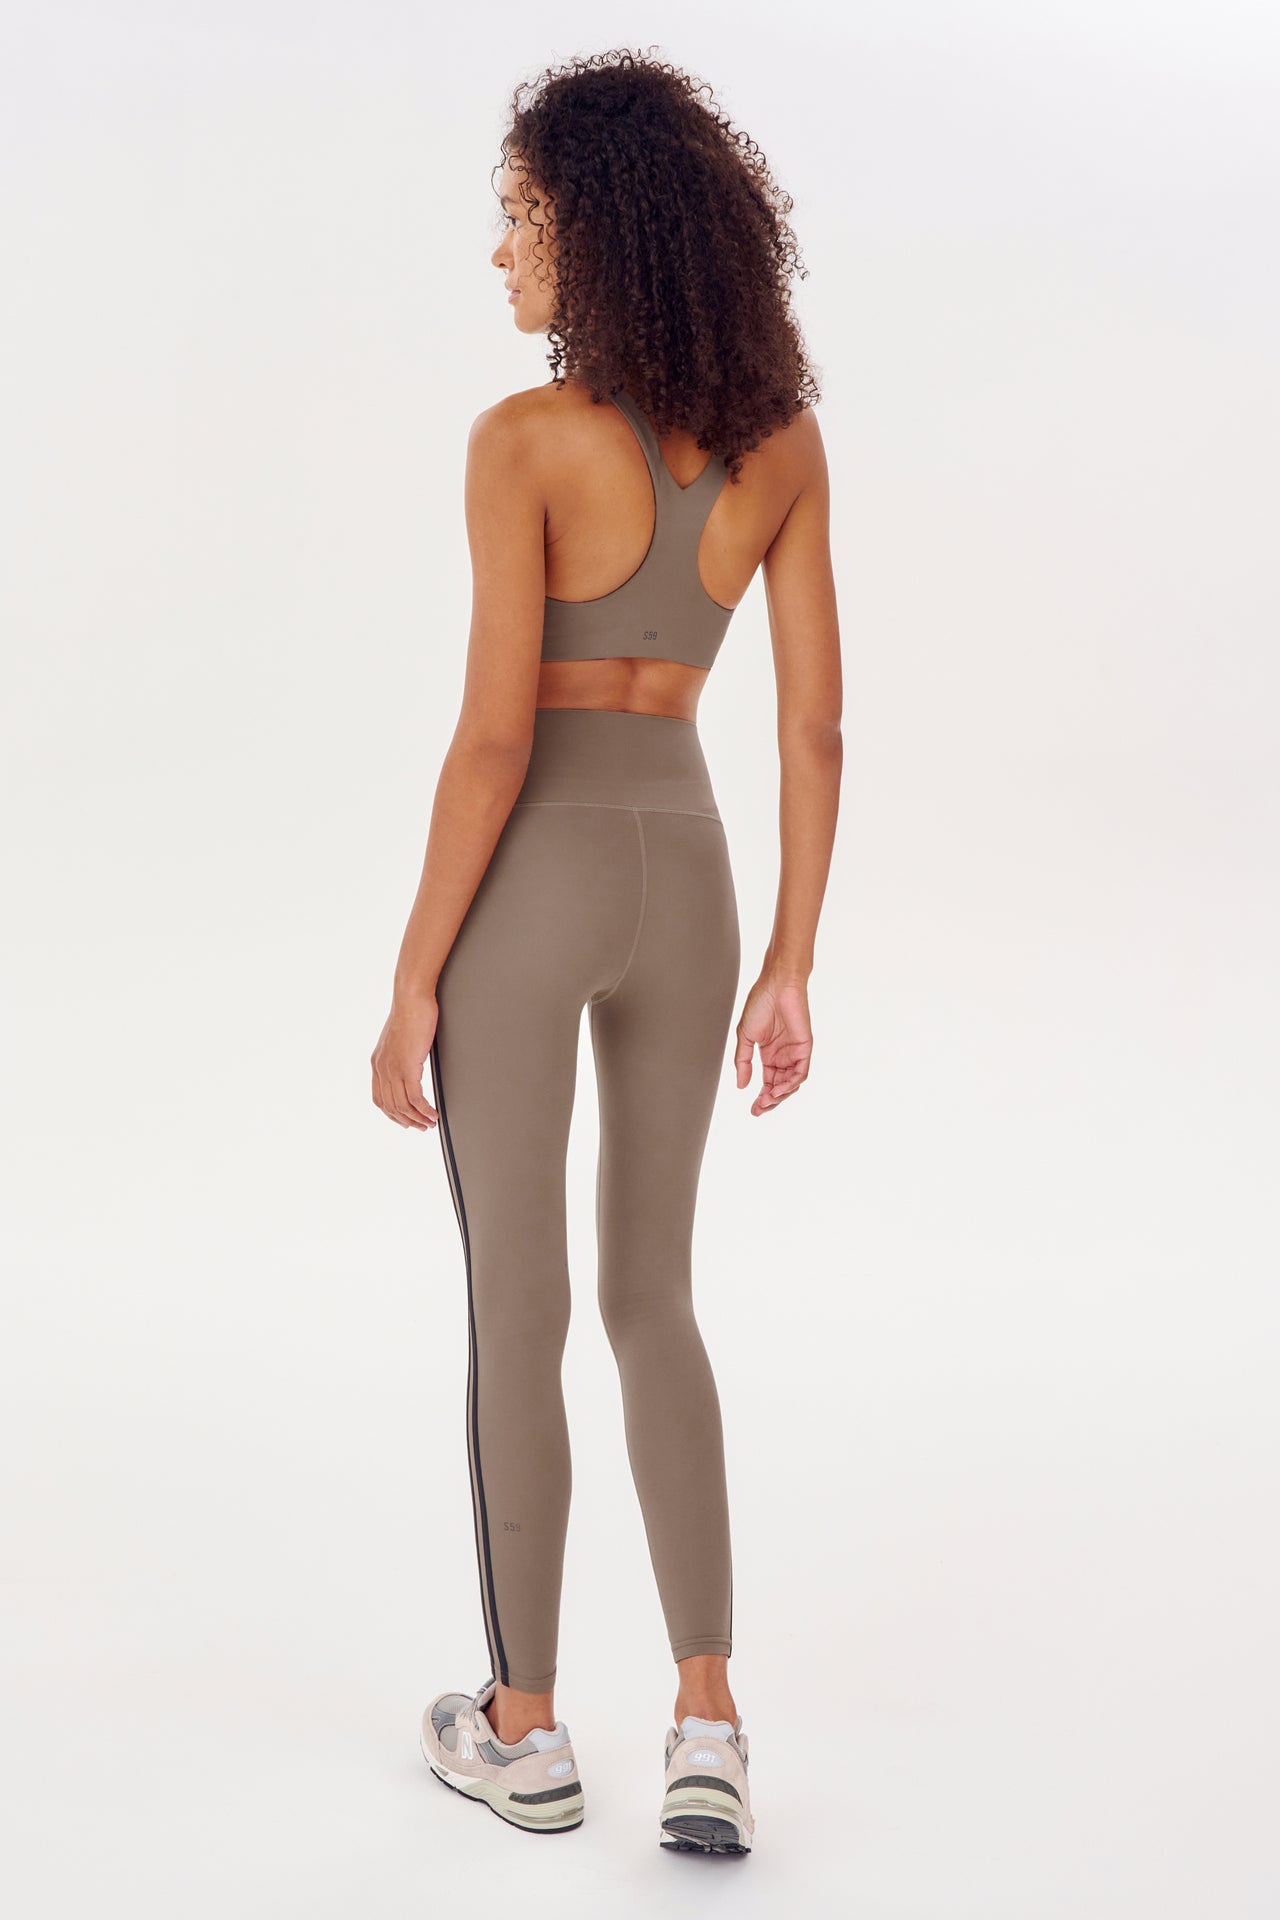 The back view of a woman in an Ella Airweight Bra - Lentil/Black from SPLITS59 collection, racer back bra, and leggings.